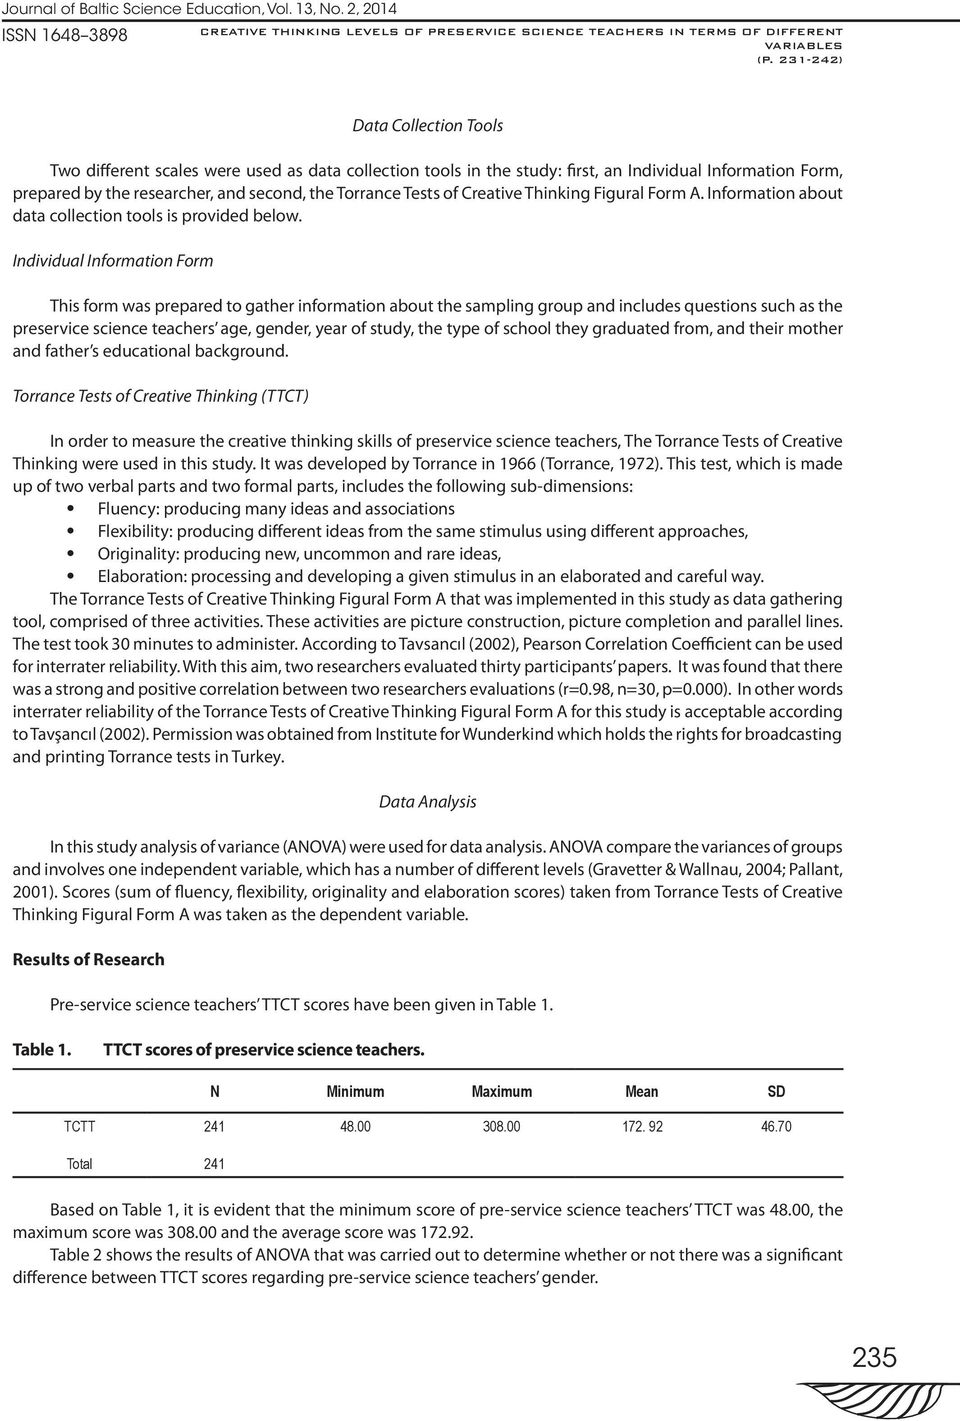 Individual Information Form This form was prepared to gather information about the sampling group and includes questions such as the preservice science teachers age, gender, year of study, the type